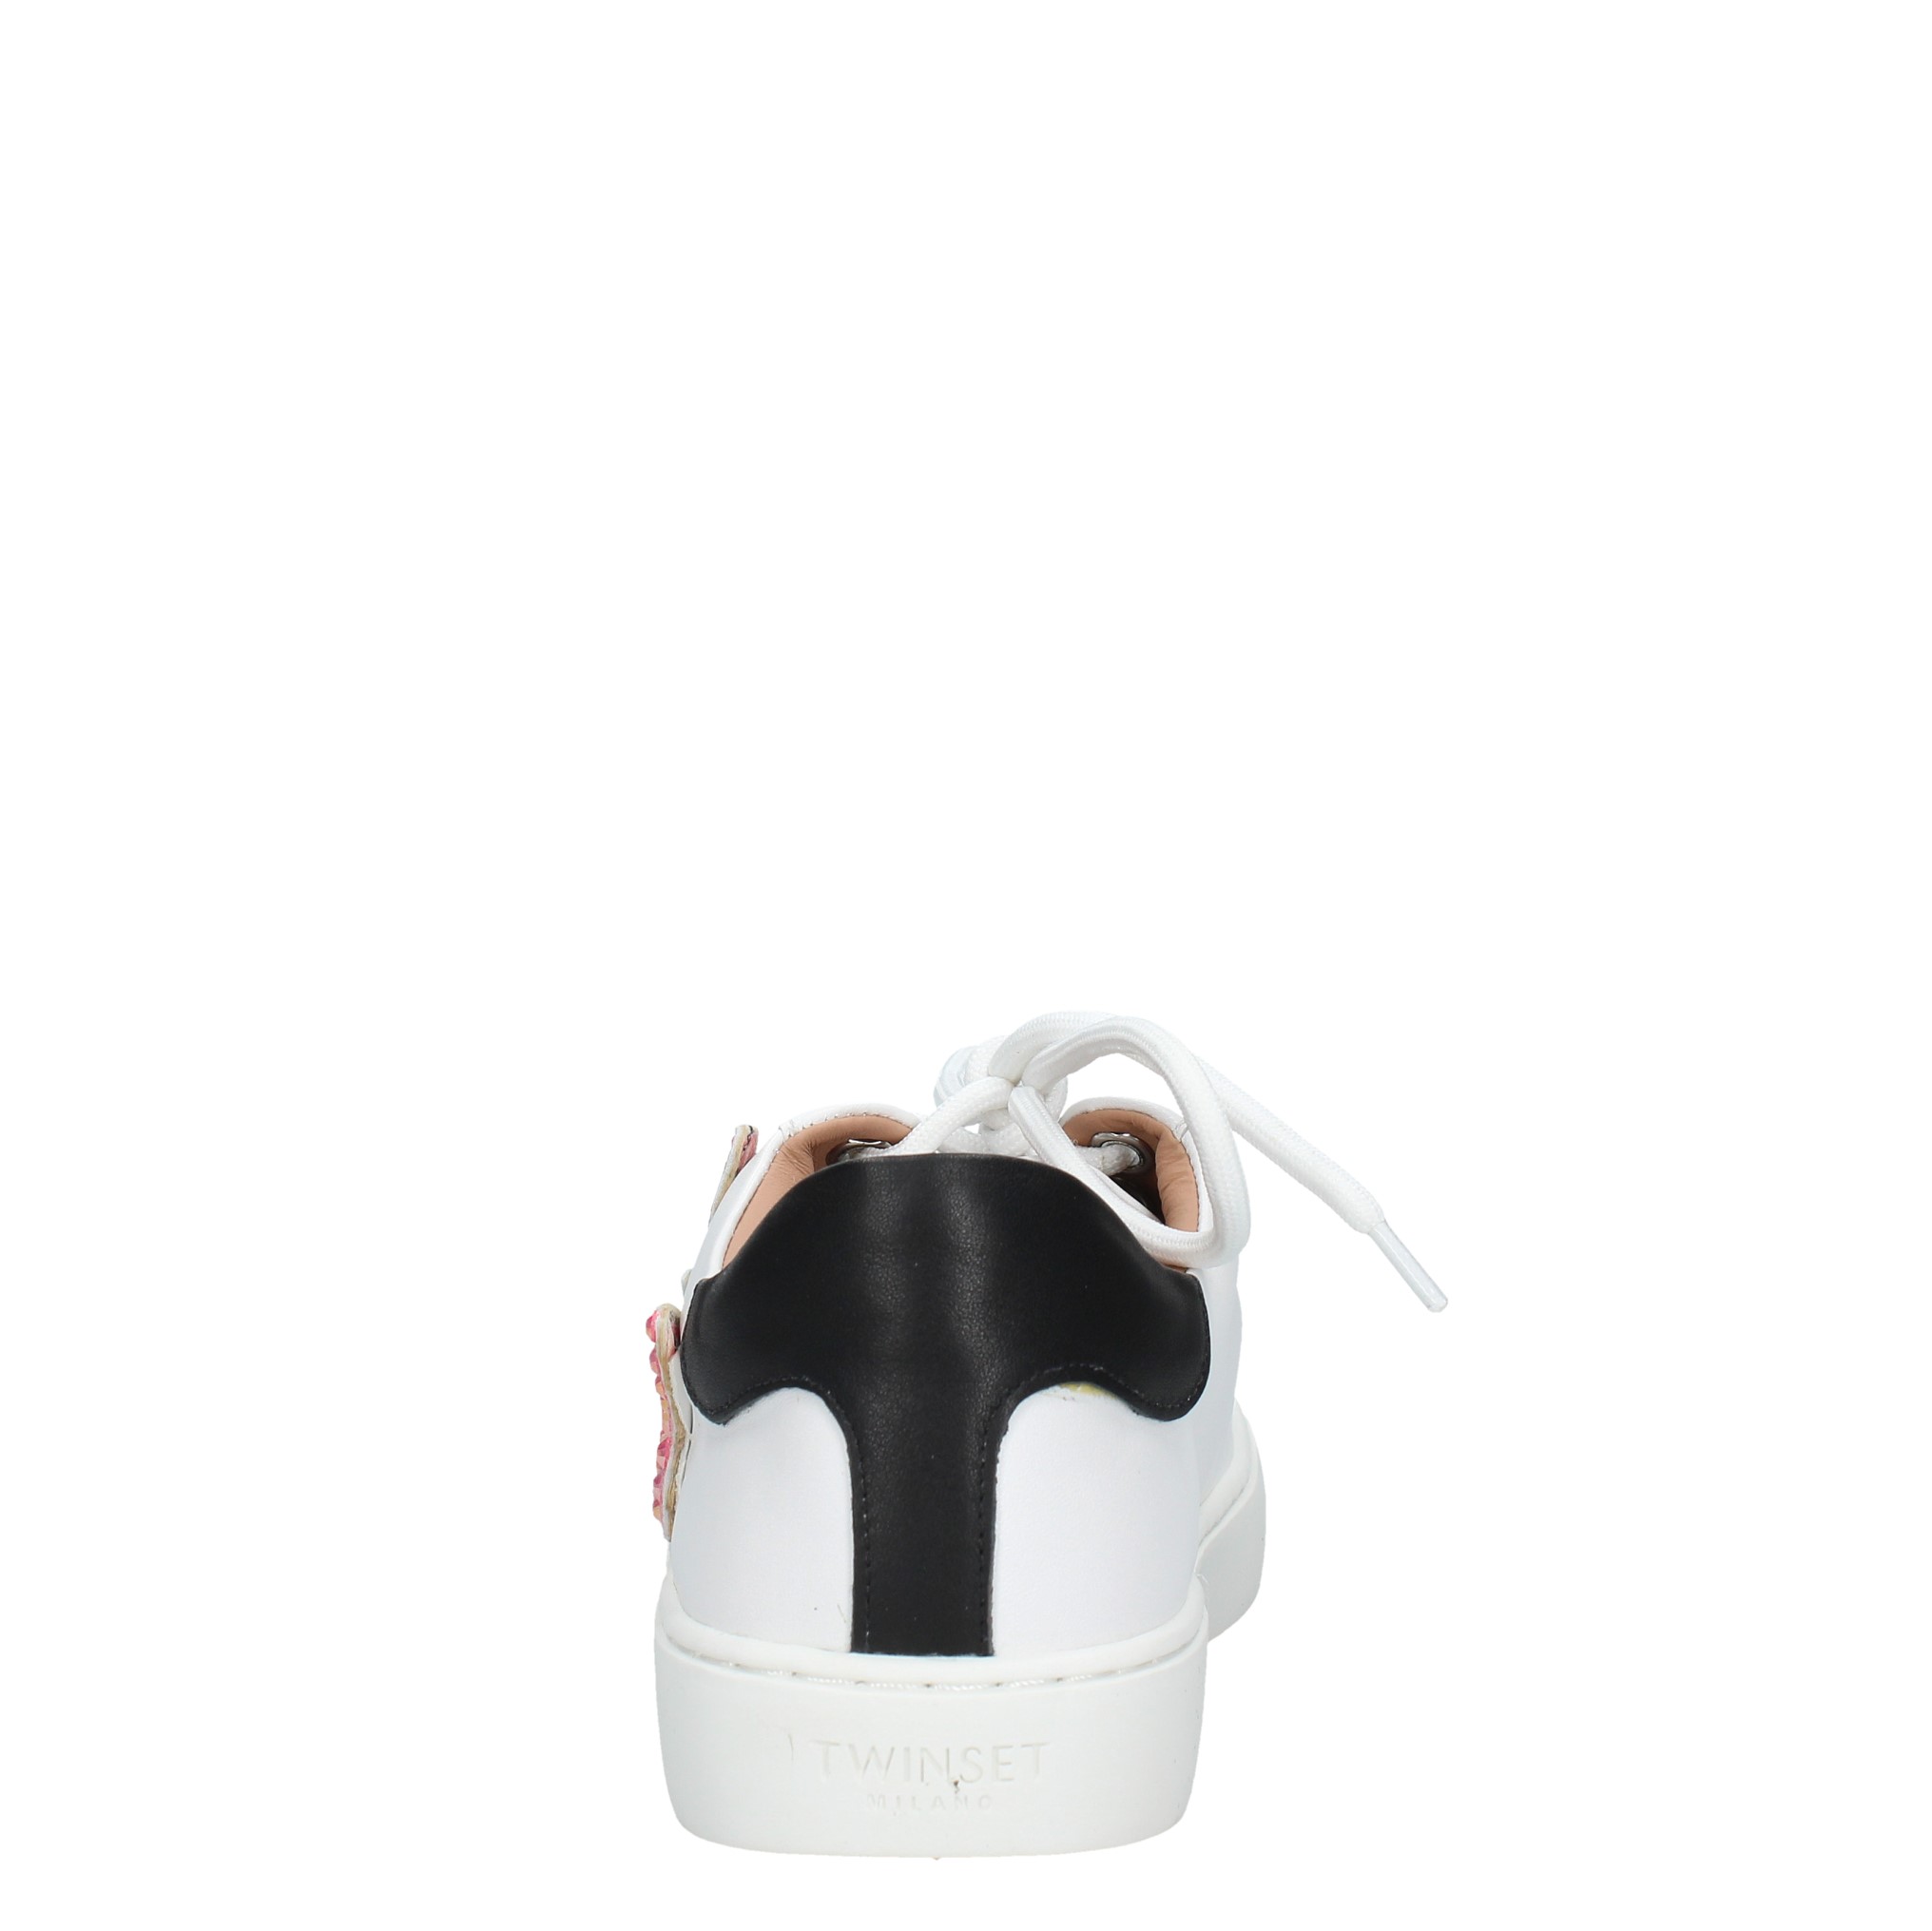 Sneakers in pelle - TWINSET - Ginevra calzature